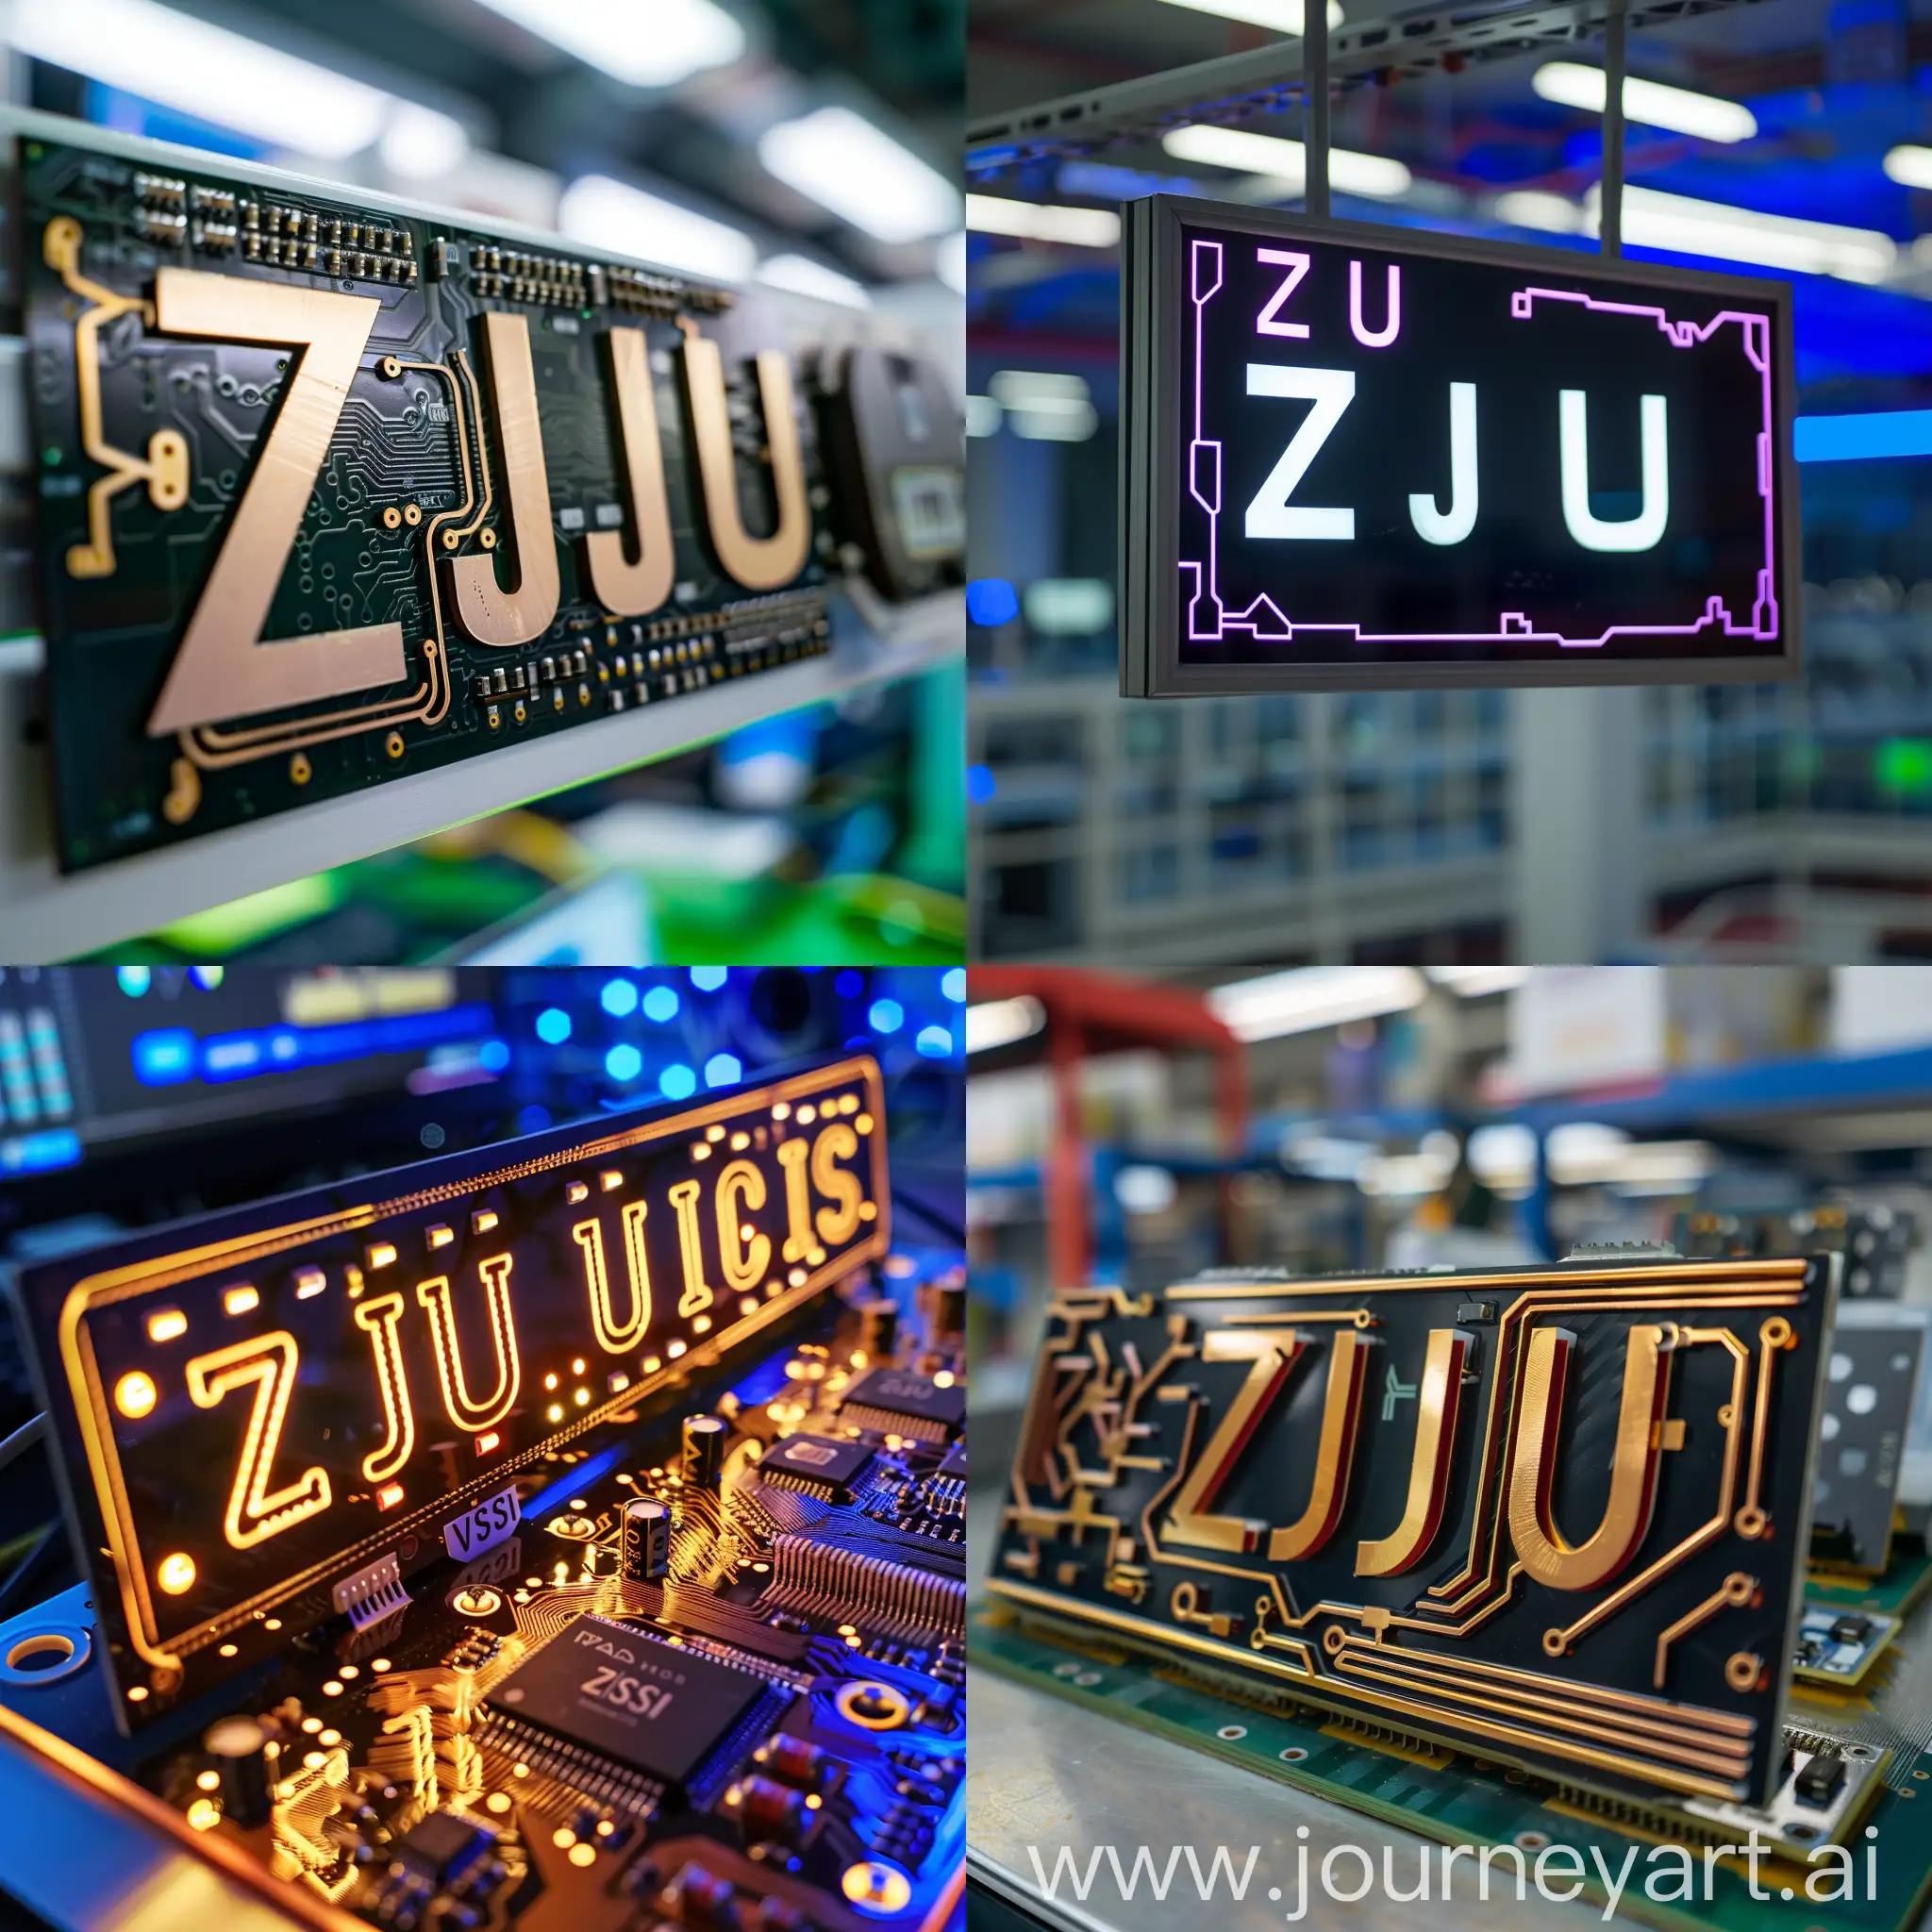 a cool lab sign with text "ZJU" and "VLSI"